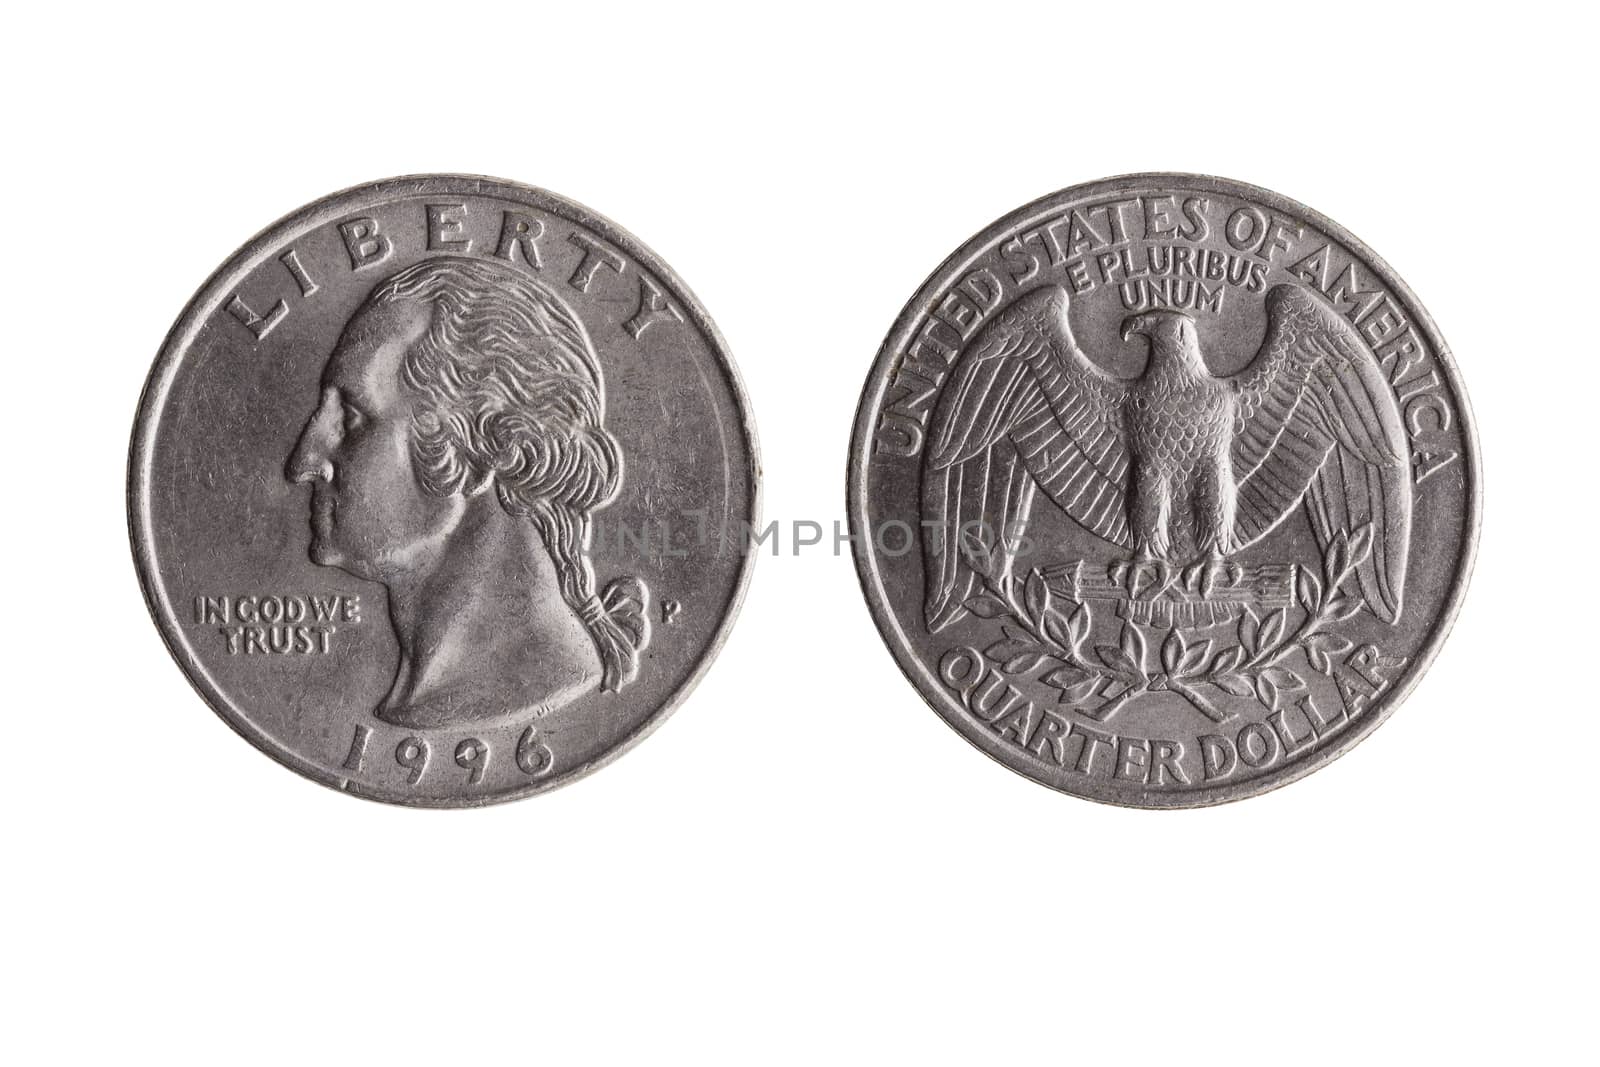 USA quarter dollar nickel coin (25 cents) with a portrait image of George Washington obverse and Bald Eagle reverse cut out and isolated on a white background